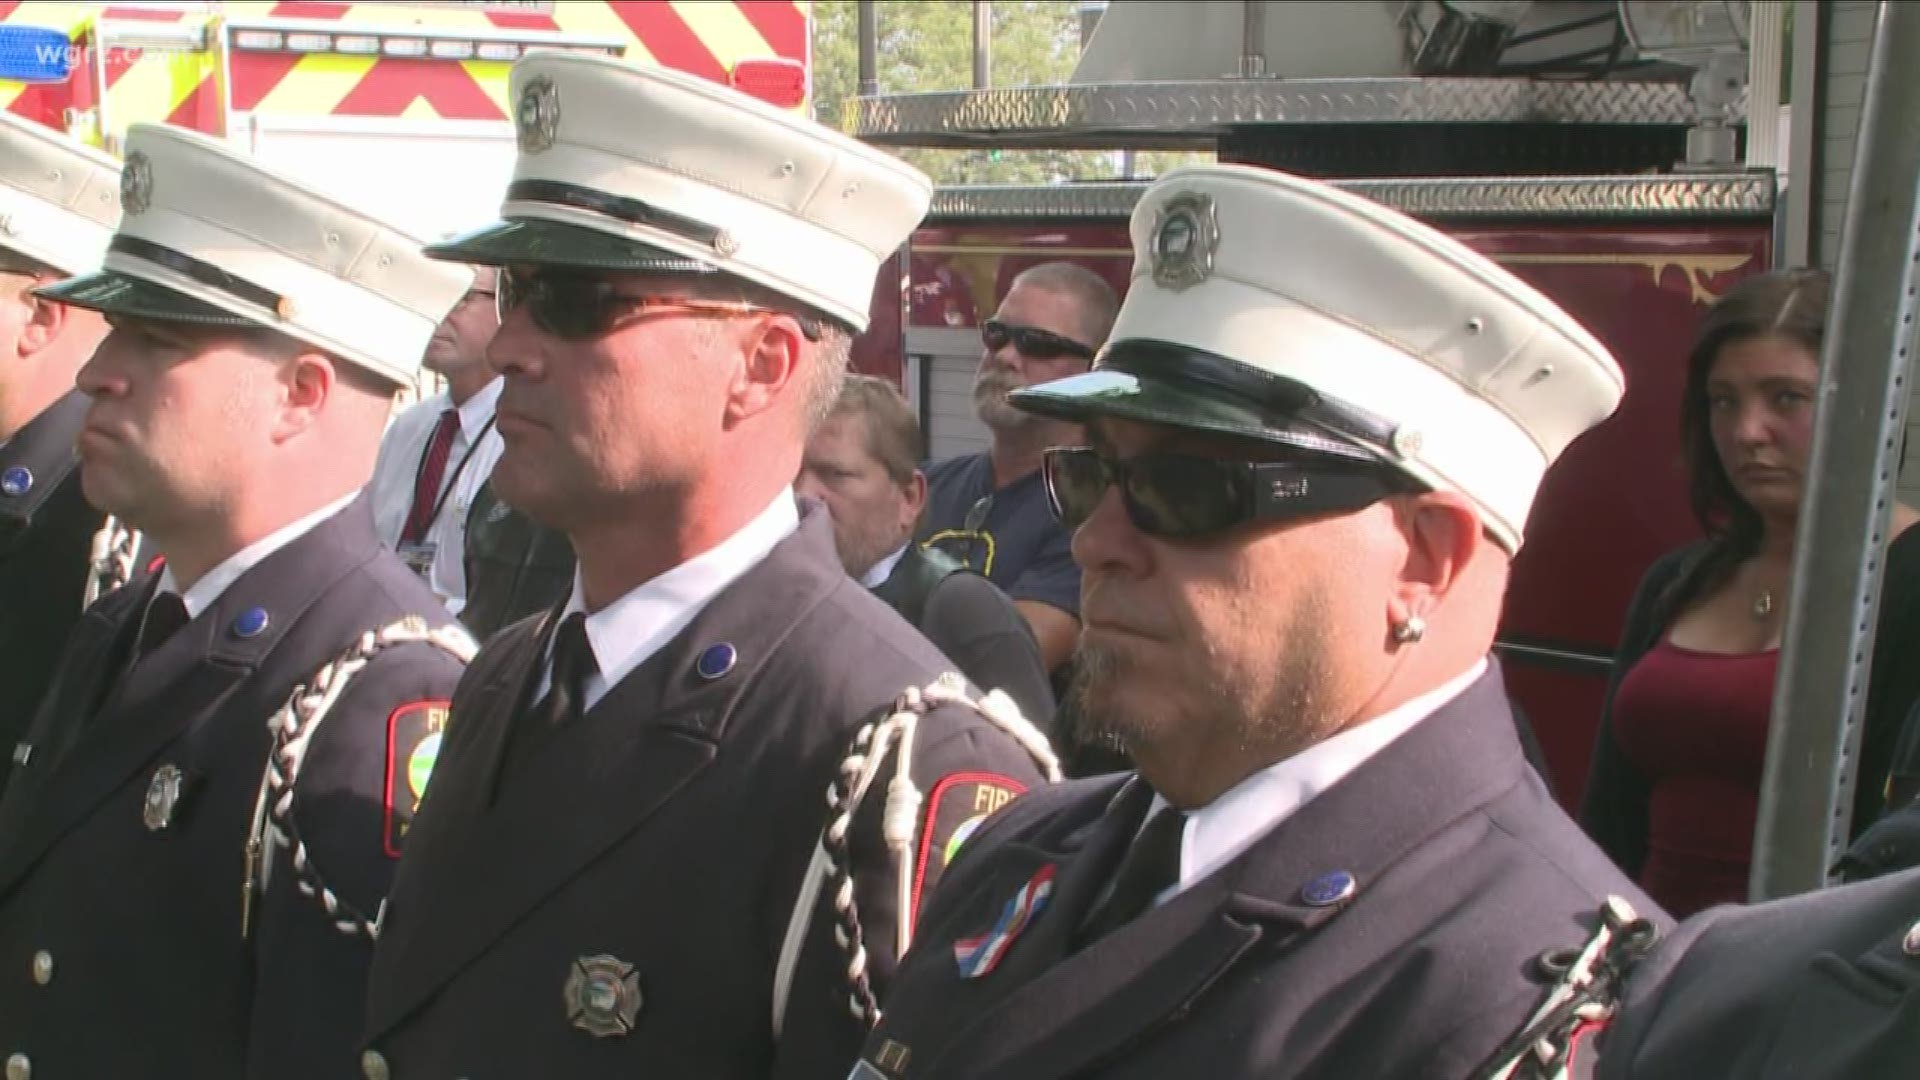 police officers and firefighters remembered where they were 18-years ago.